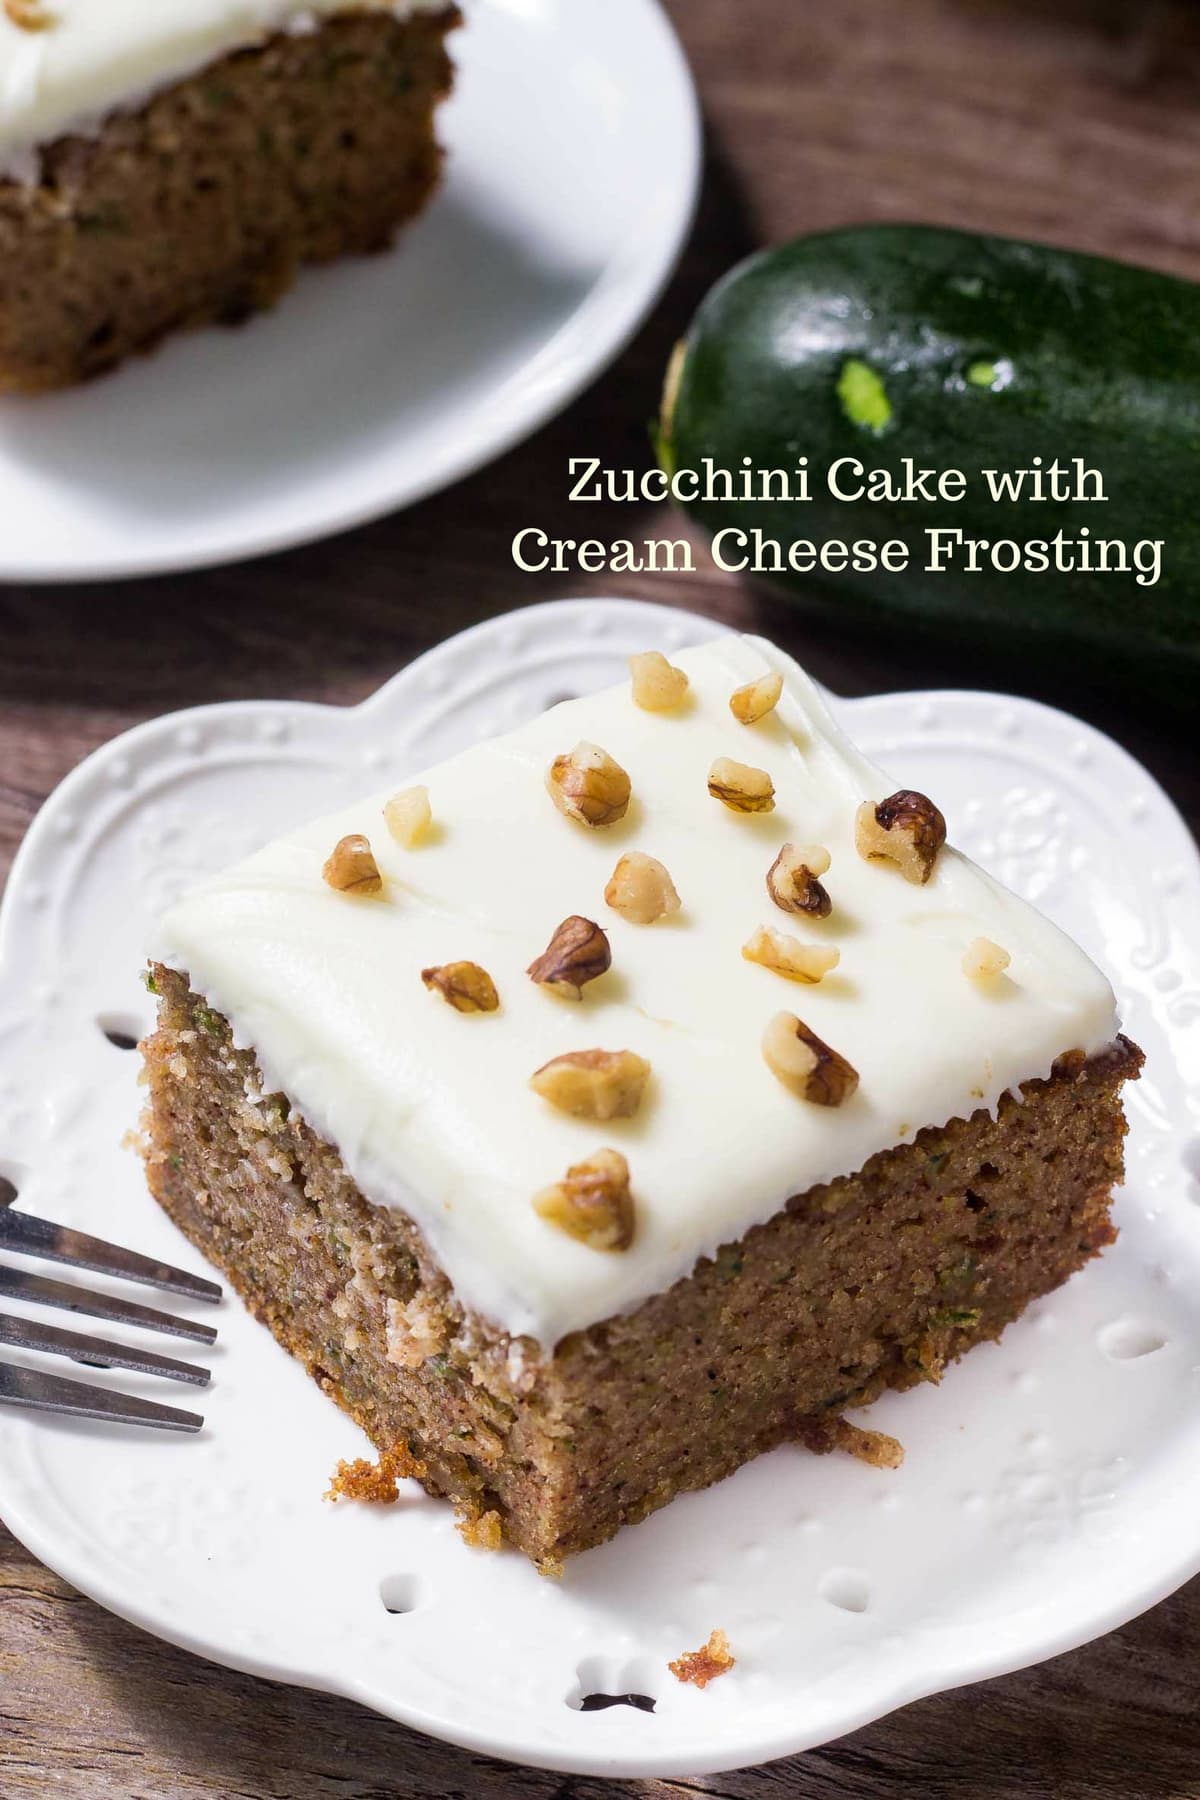 Zucchini cake topped with frosting and walnuts